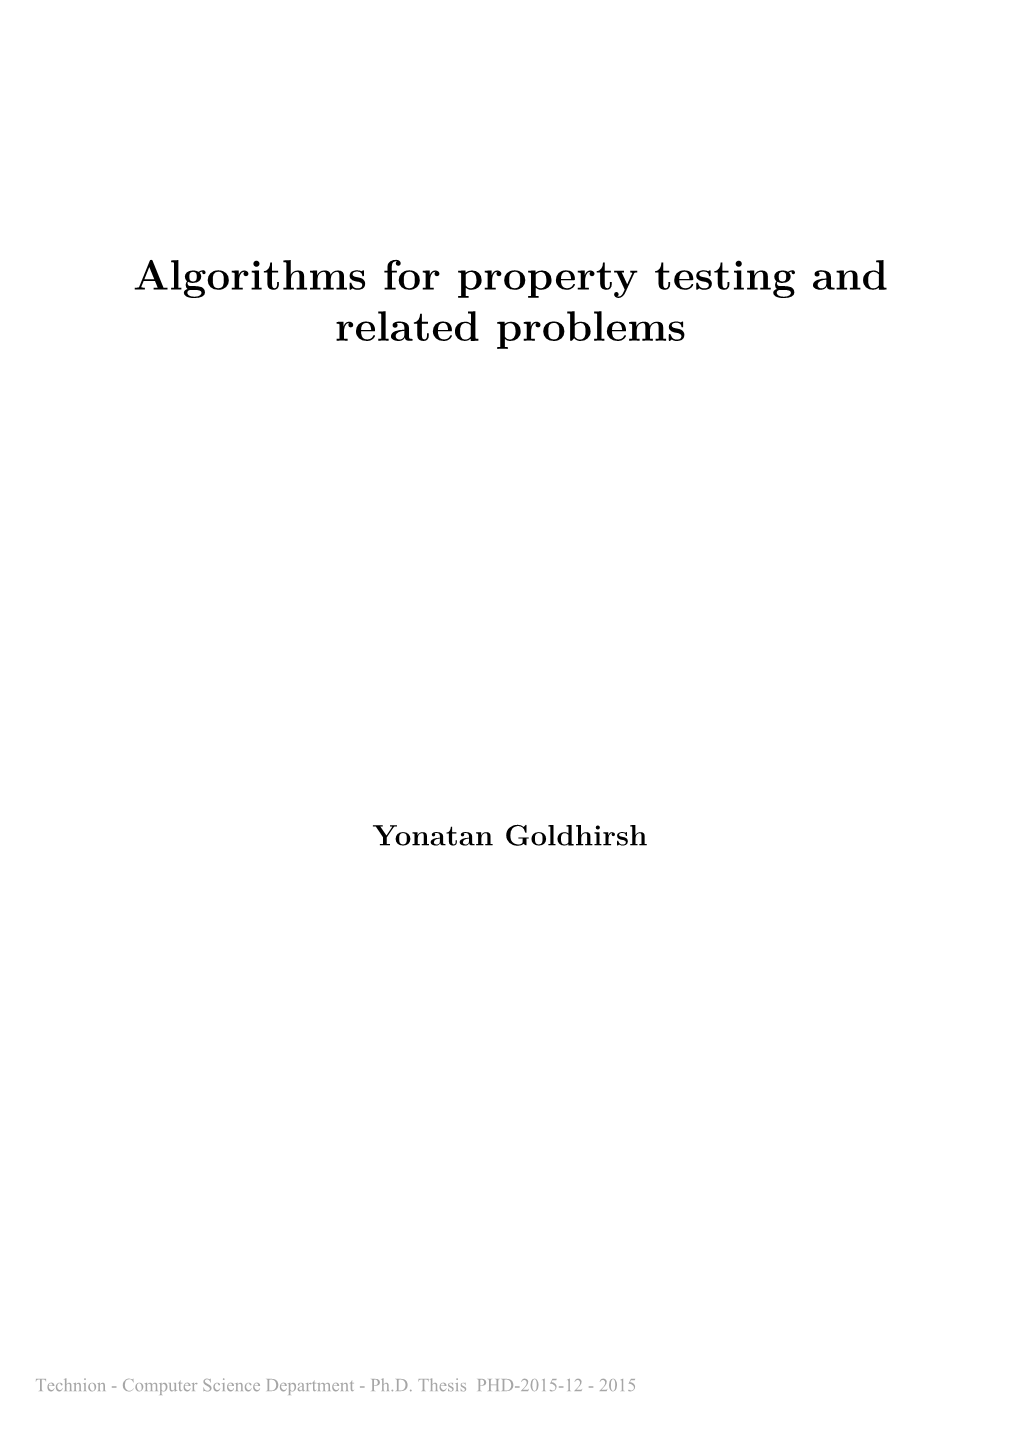 Algorithms for Property Testing and Related Problems